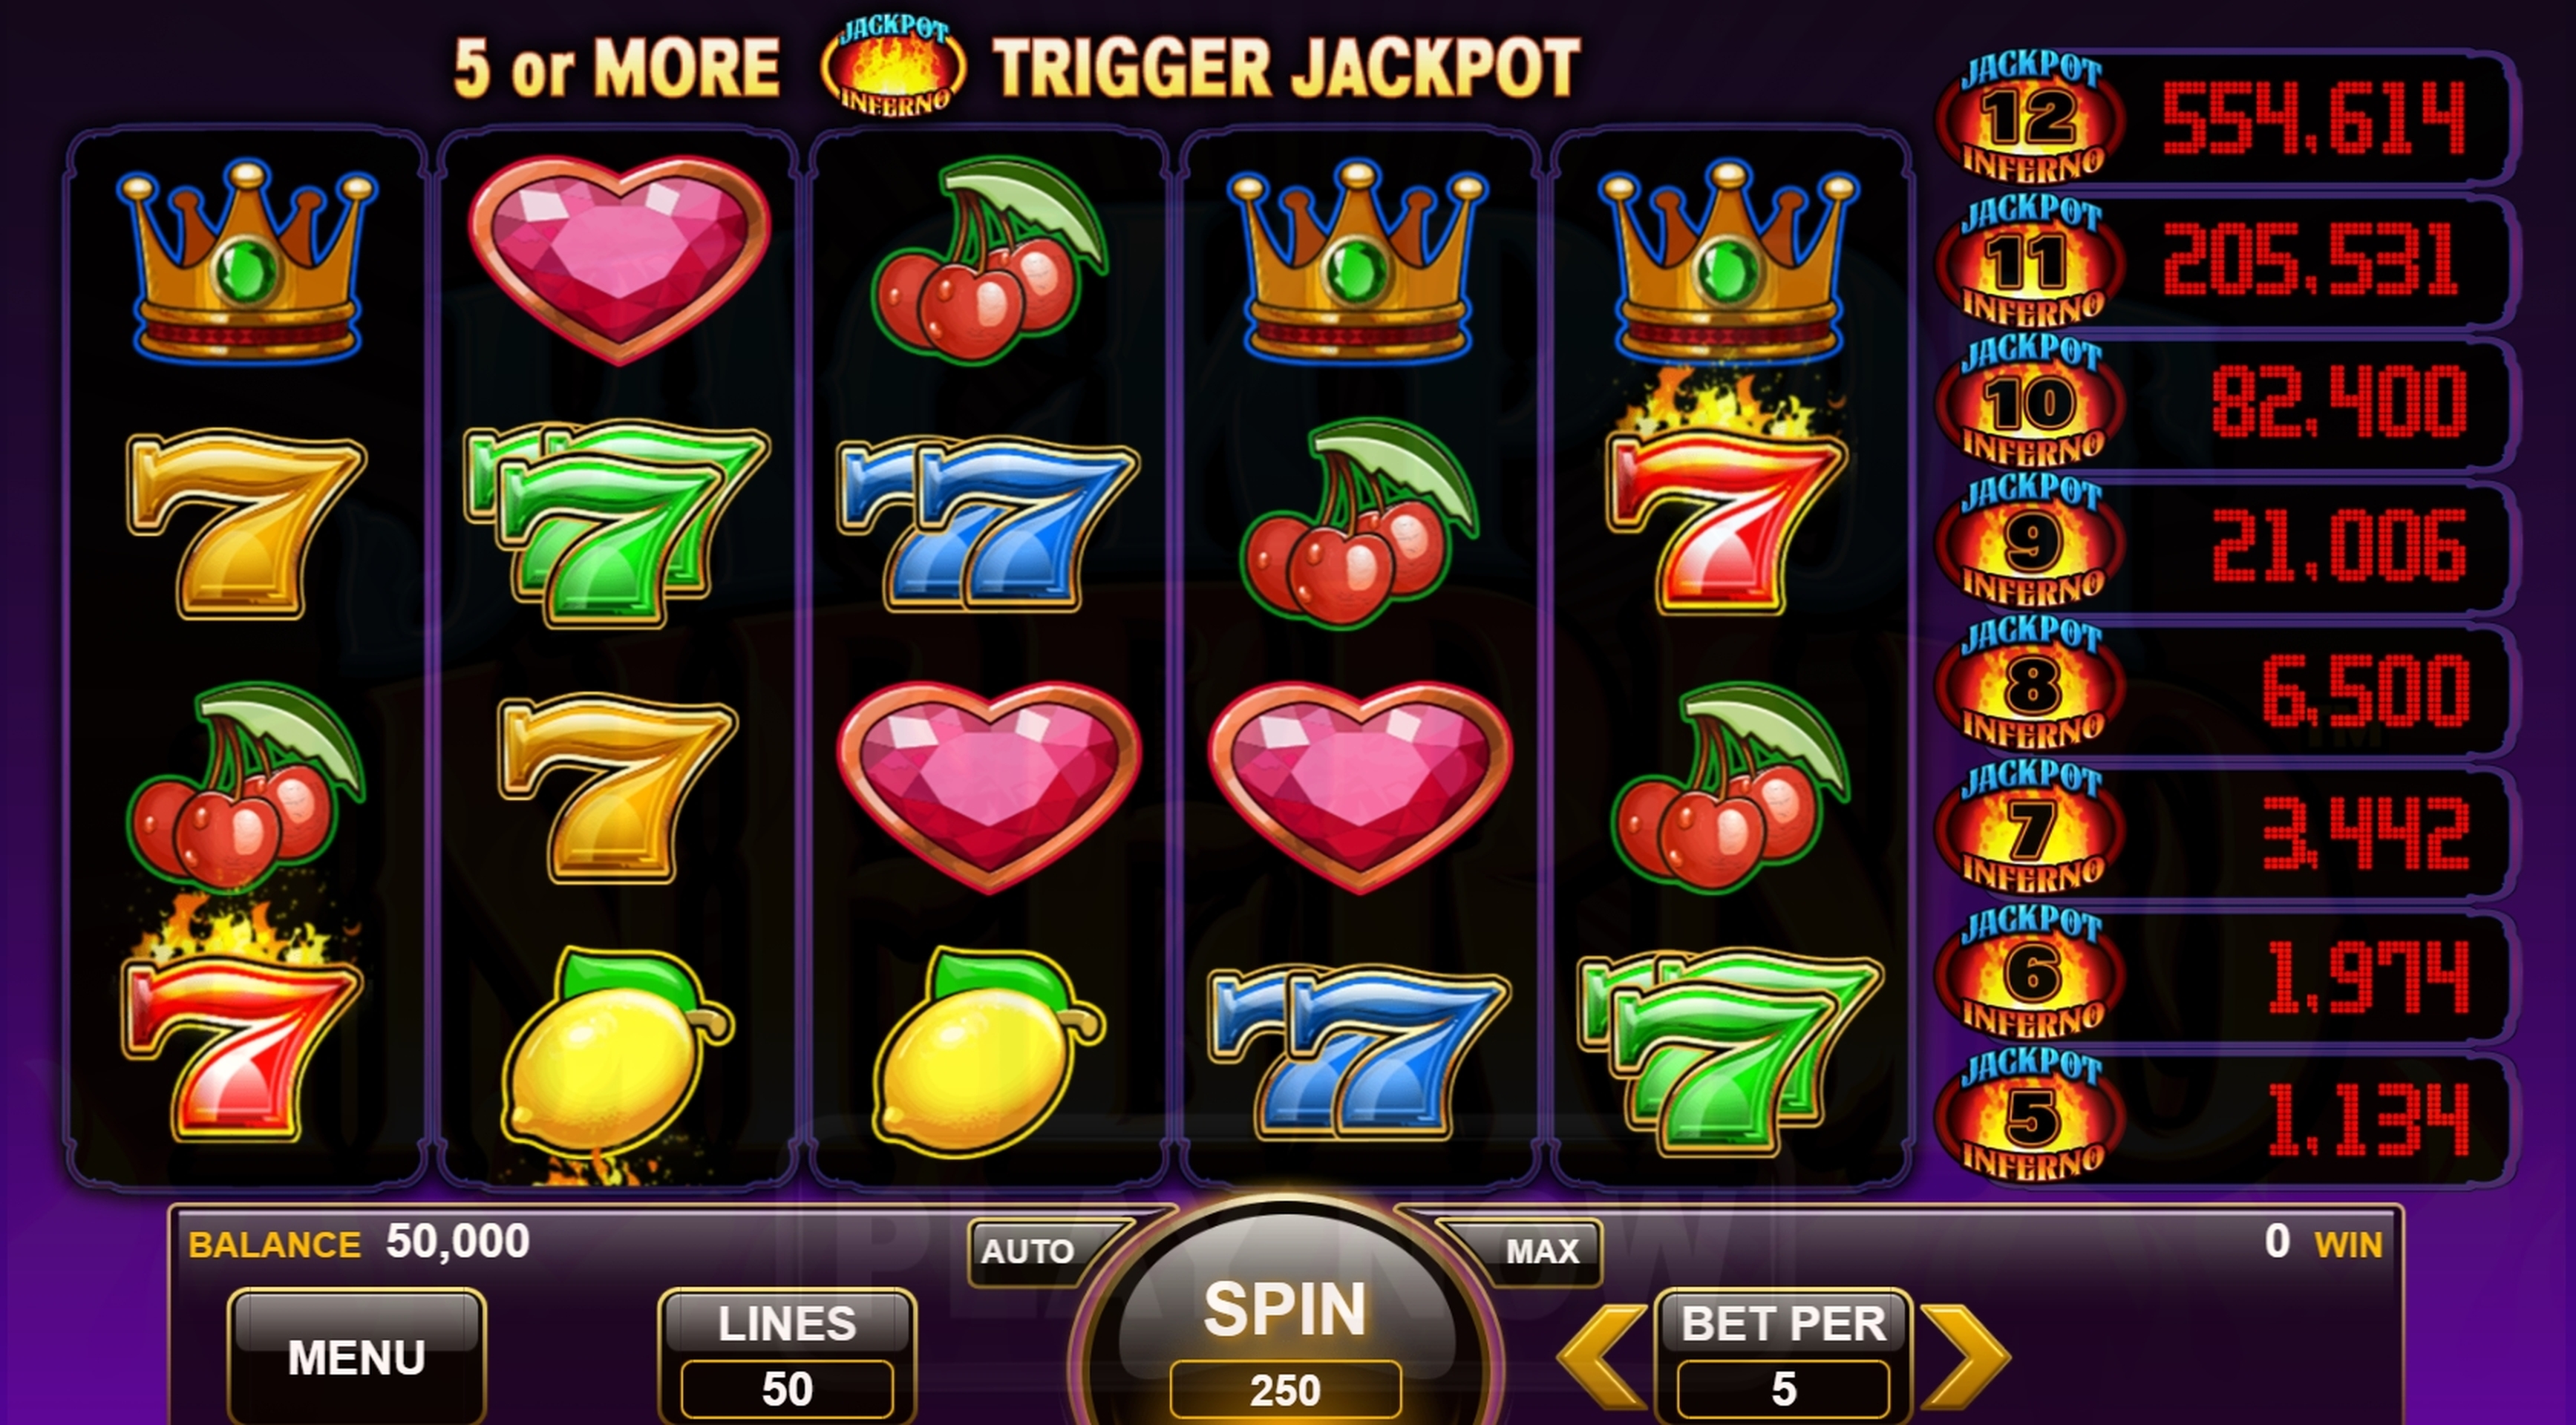 Slots Inferno Instant Play